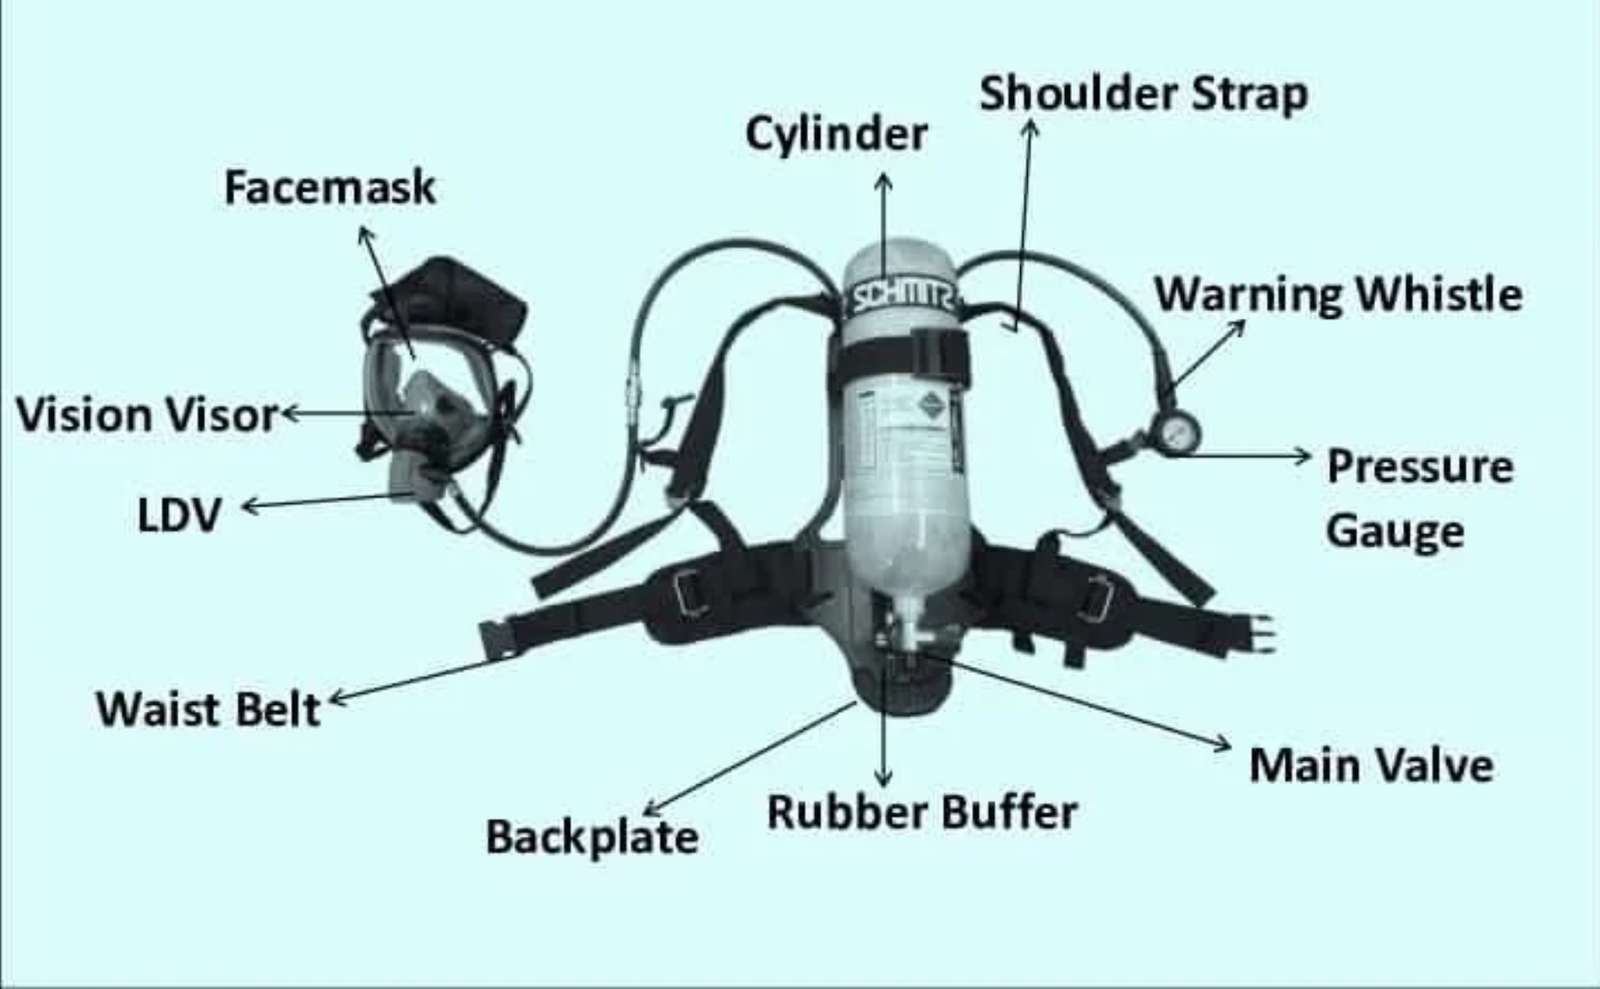 Self-contained breathing apparatus. (SCABA) puzzle online from photo